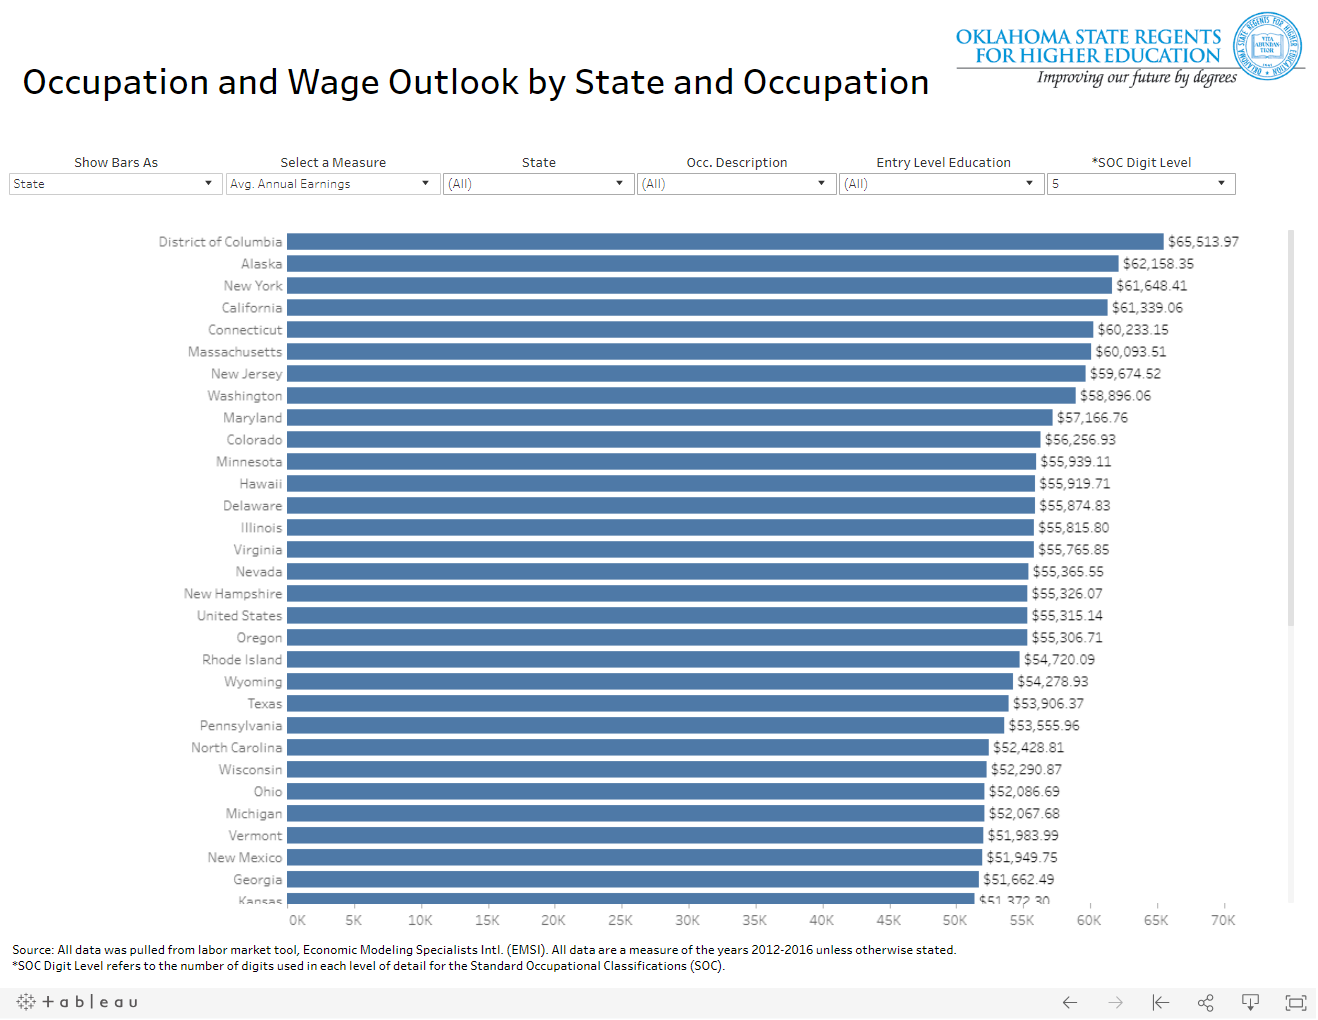 Screenshot of graph showing information on occupation and wage outlook based on state and occupation